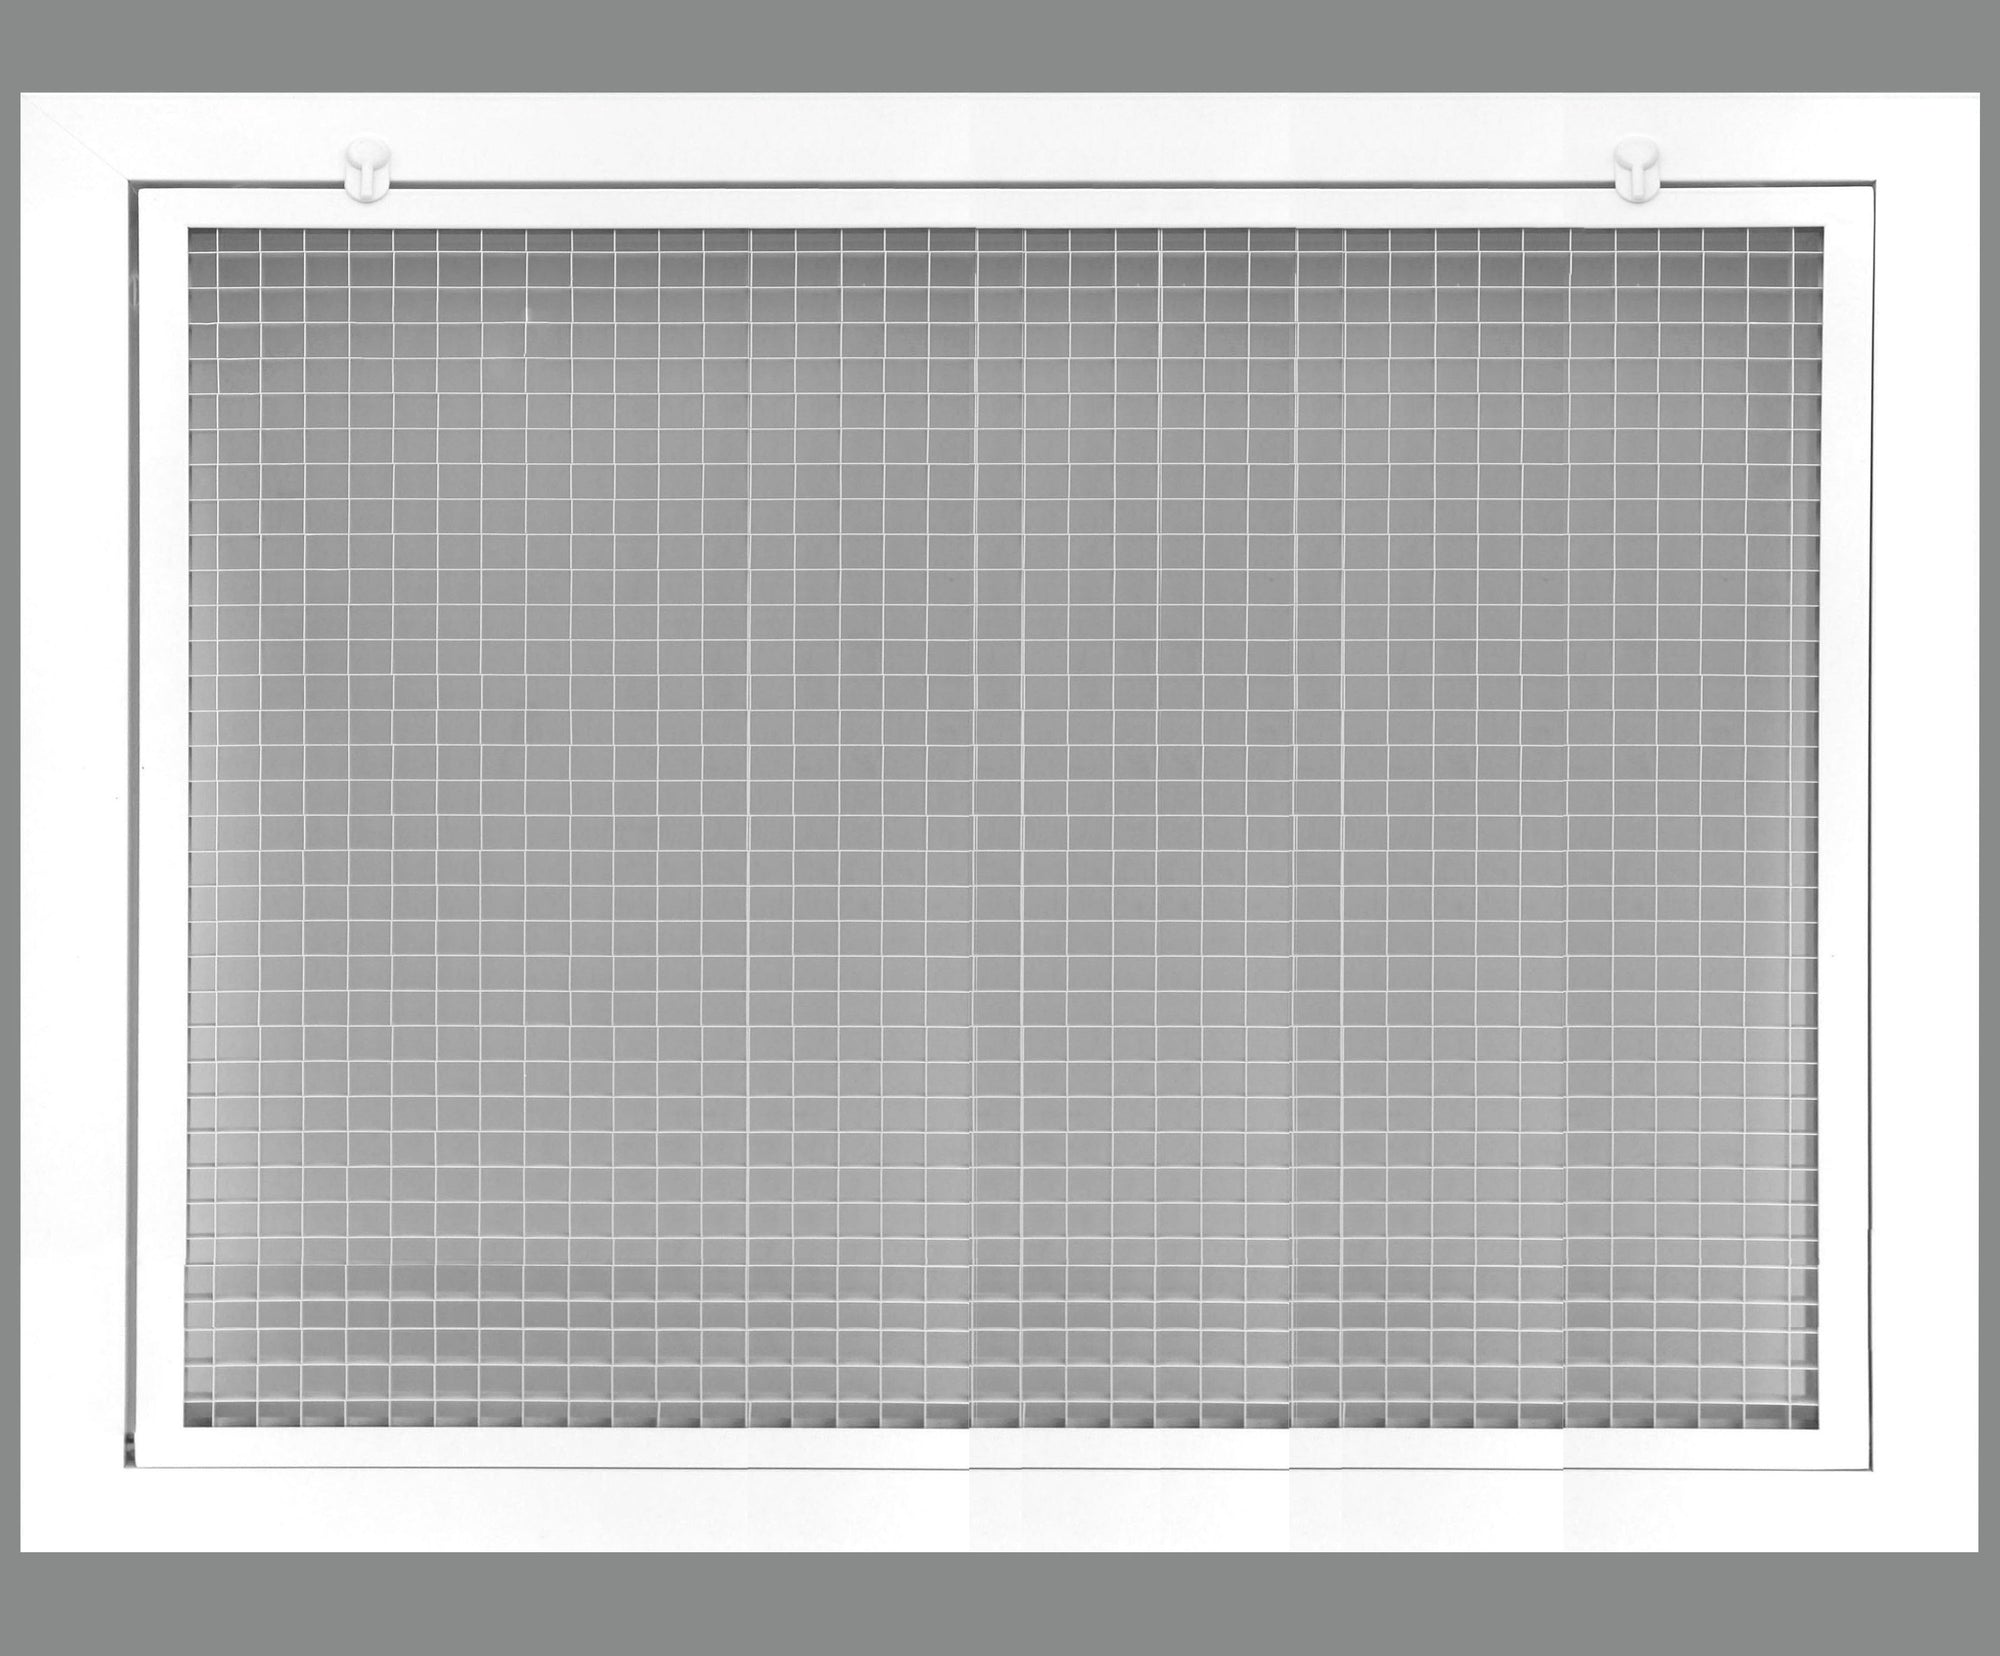 20" x 16" Cube Core Eggcrate Return Air Filter Grille for 1" Filter